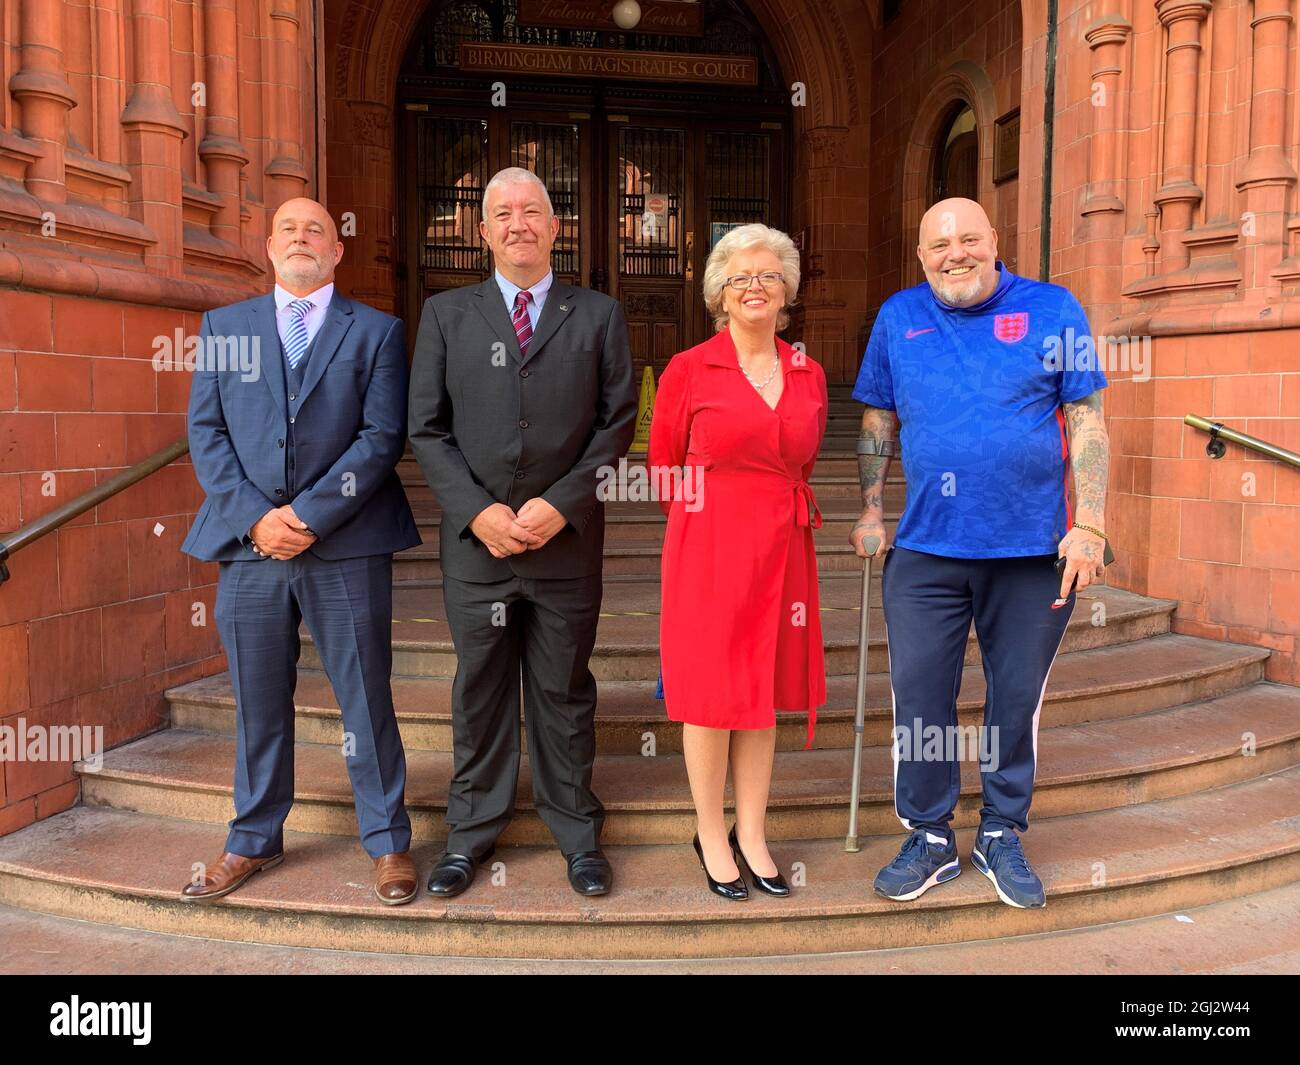 Julie Hambleton with Kevin Gormley (left), Michael Lutwyche (middle left) and John Porter (right) on the steps of Birmingham Magistrates' Court. Miss Hambleton, who was cleared today of taking part in a lockdown-breaking gathering has accused the police of 're-traumatising' the families of the blasts' victims. Issue date: Wednesday September 8, 2021. Stock Photo